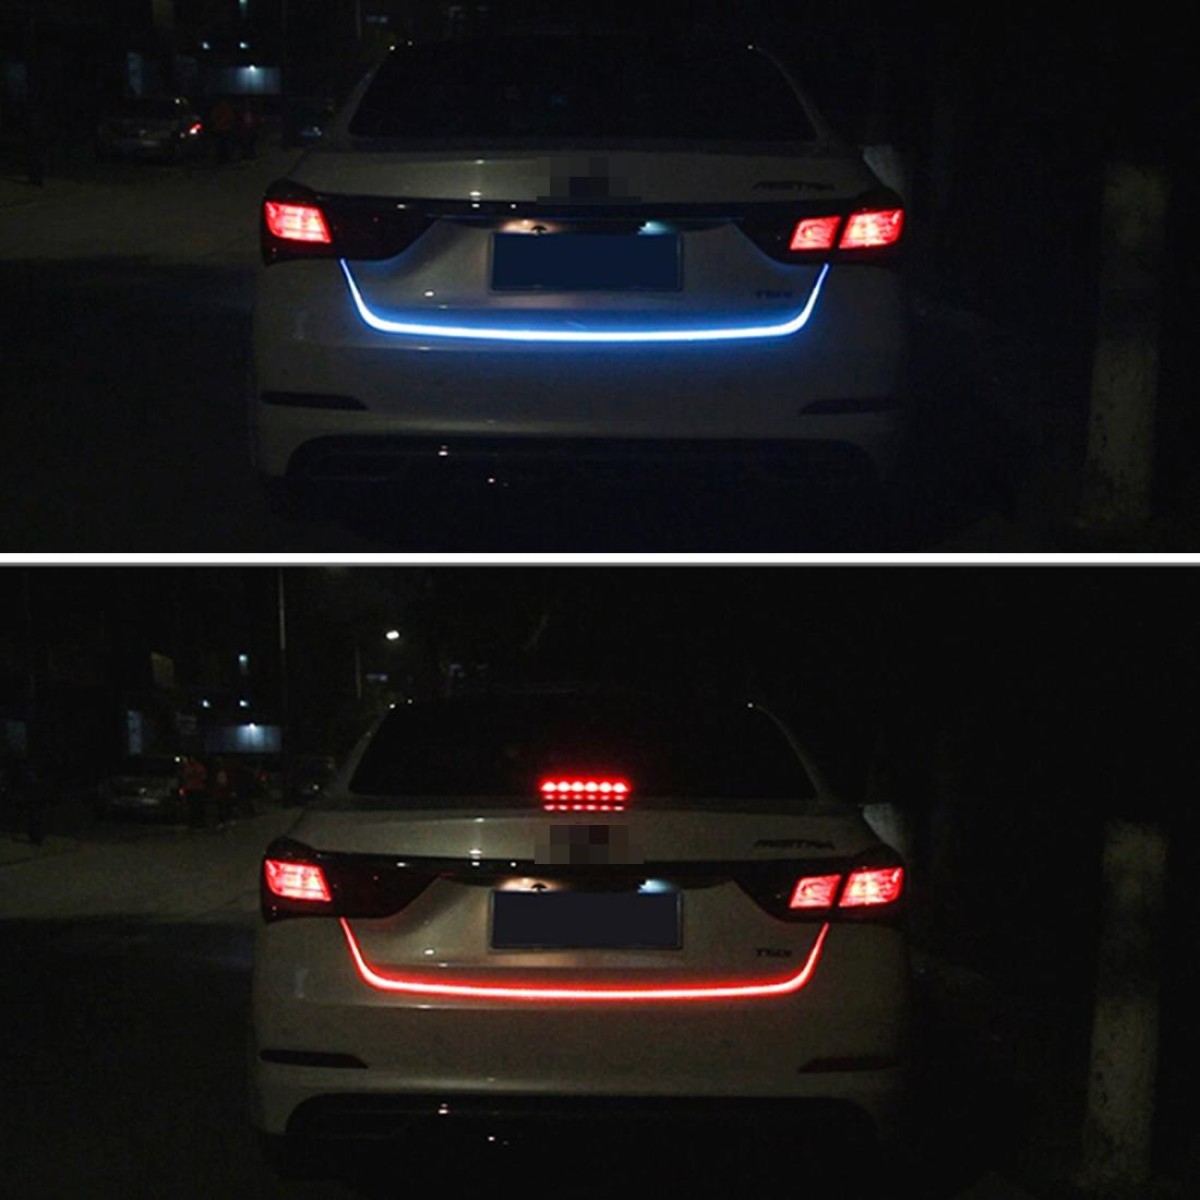 1.5m Car Auto Waterproof Universal Four Color Rear Flowing Light Tail Box Lights with Tail Light Controller, Ice Blue Light Driving Light, White Light Reversing Light, Red Light Brake Light, Yellow Light Turn Signal Light, LED Lamp Strip Tail Decoration